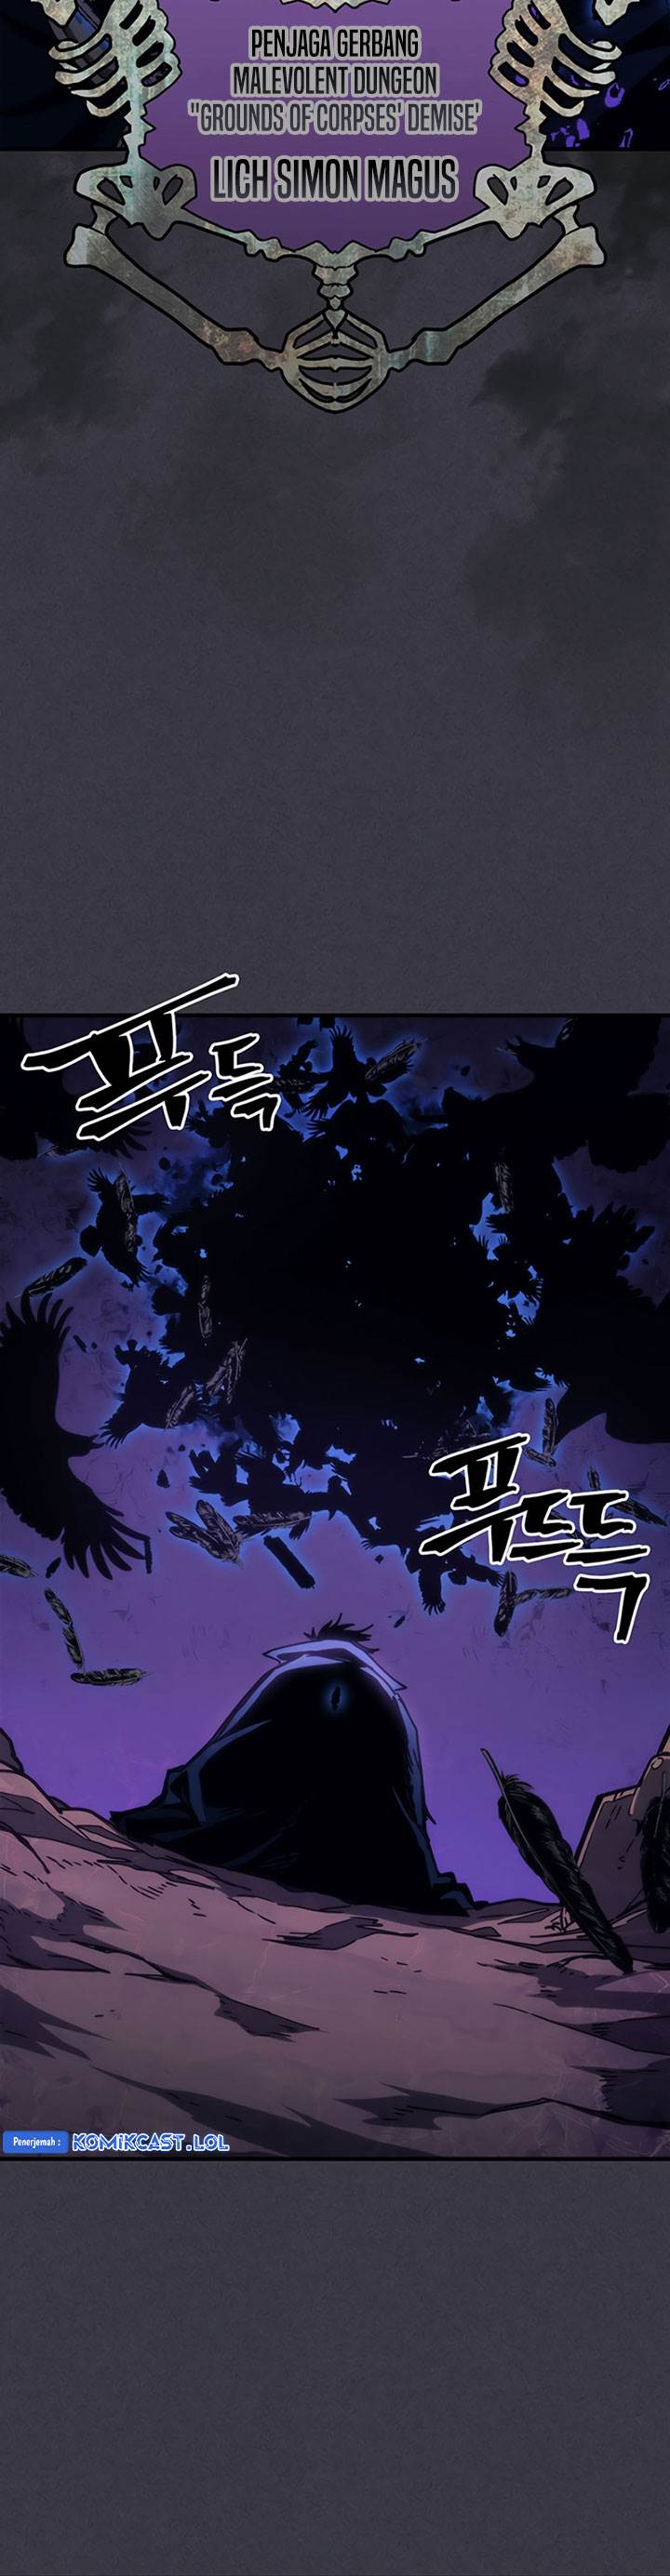 The Unbeatable Dungeon’s Lazy Boss Monster Chapter 29